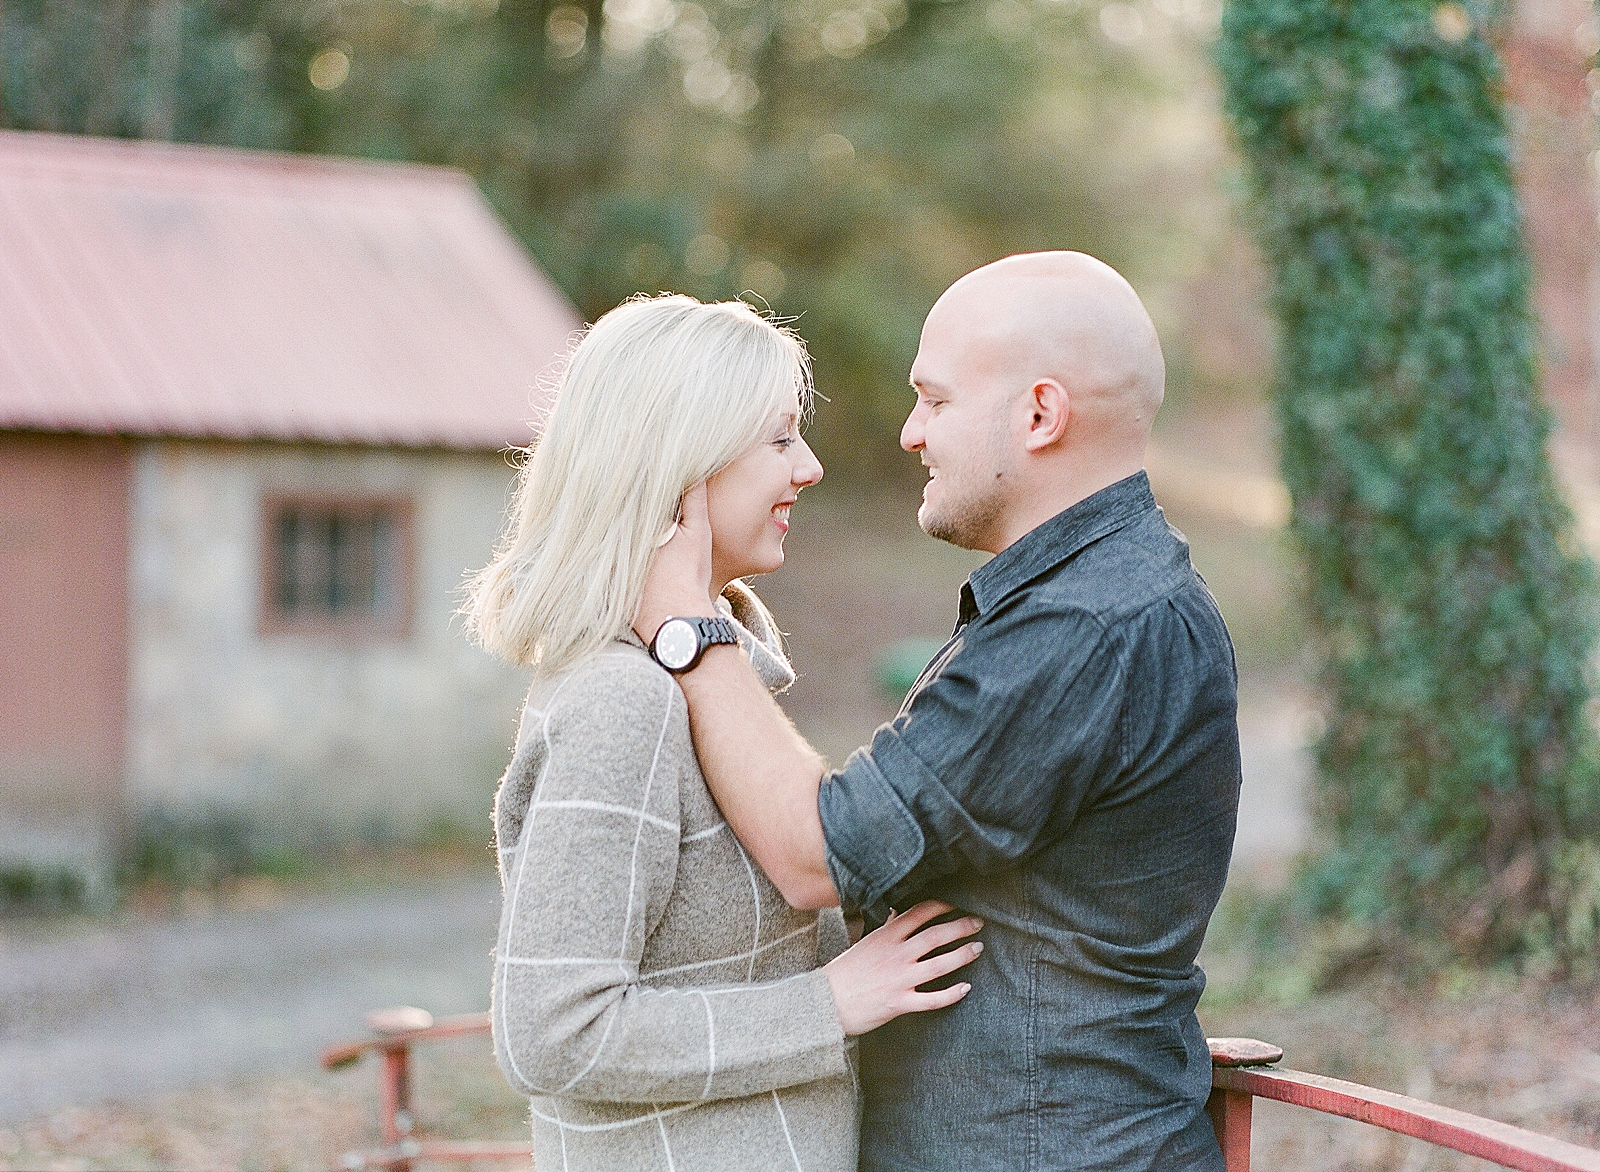 John C Campbell Folk School Engagement Session Couple Laughing Together Photo